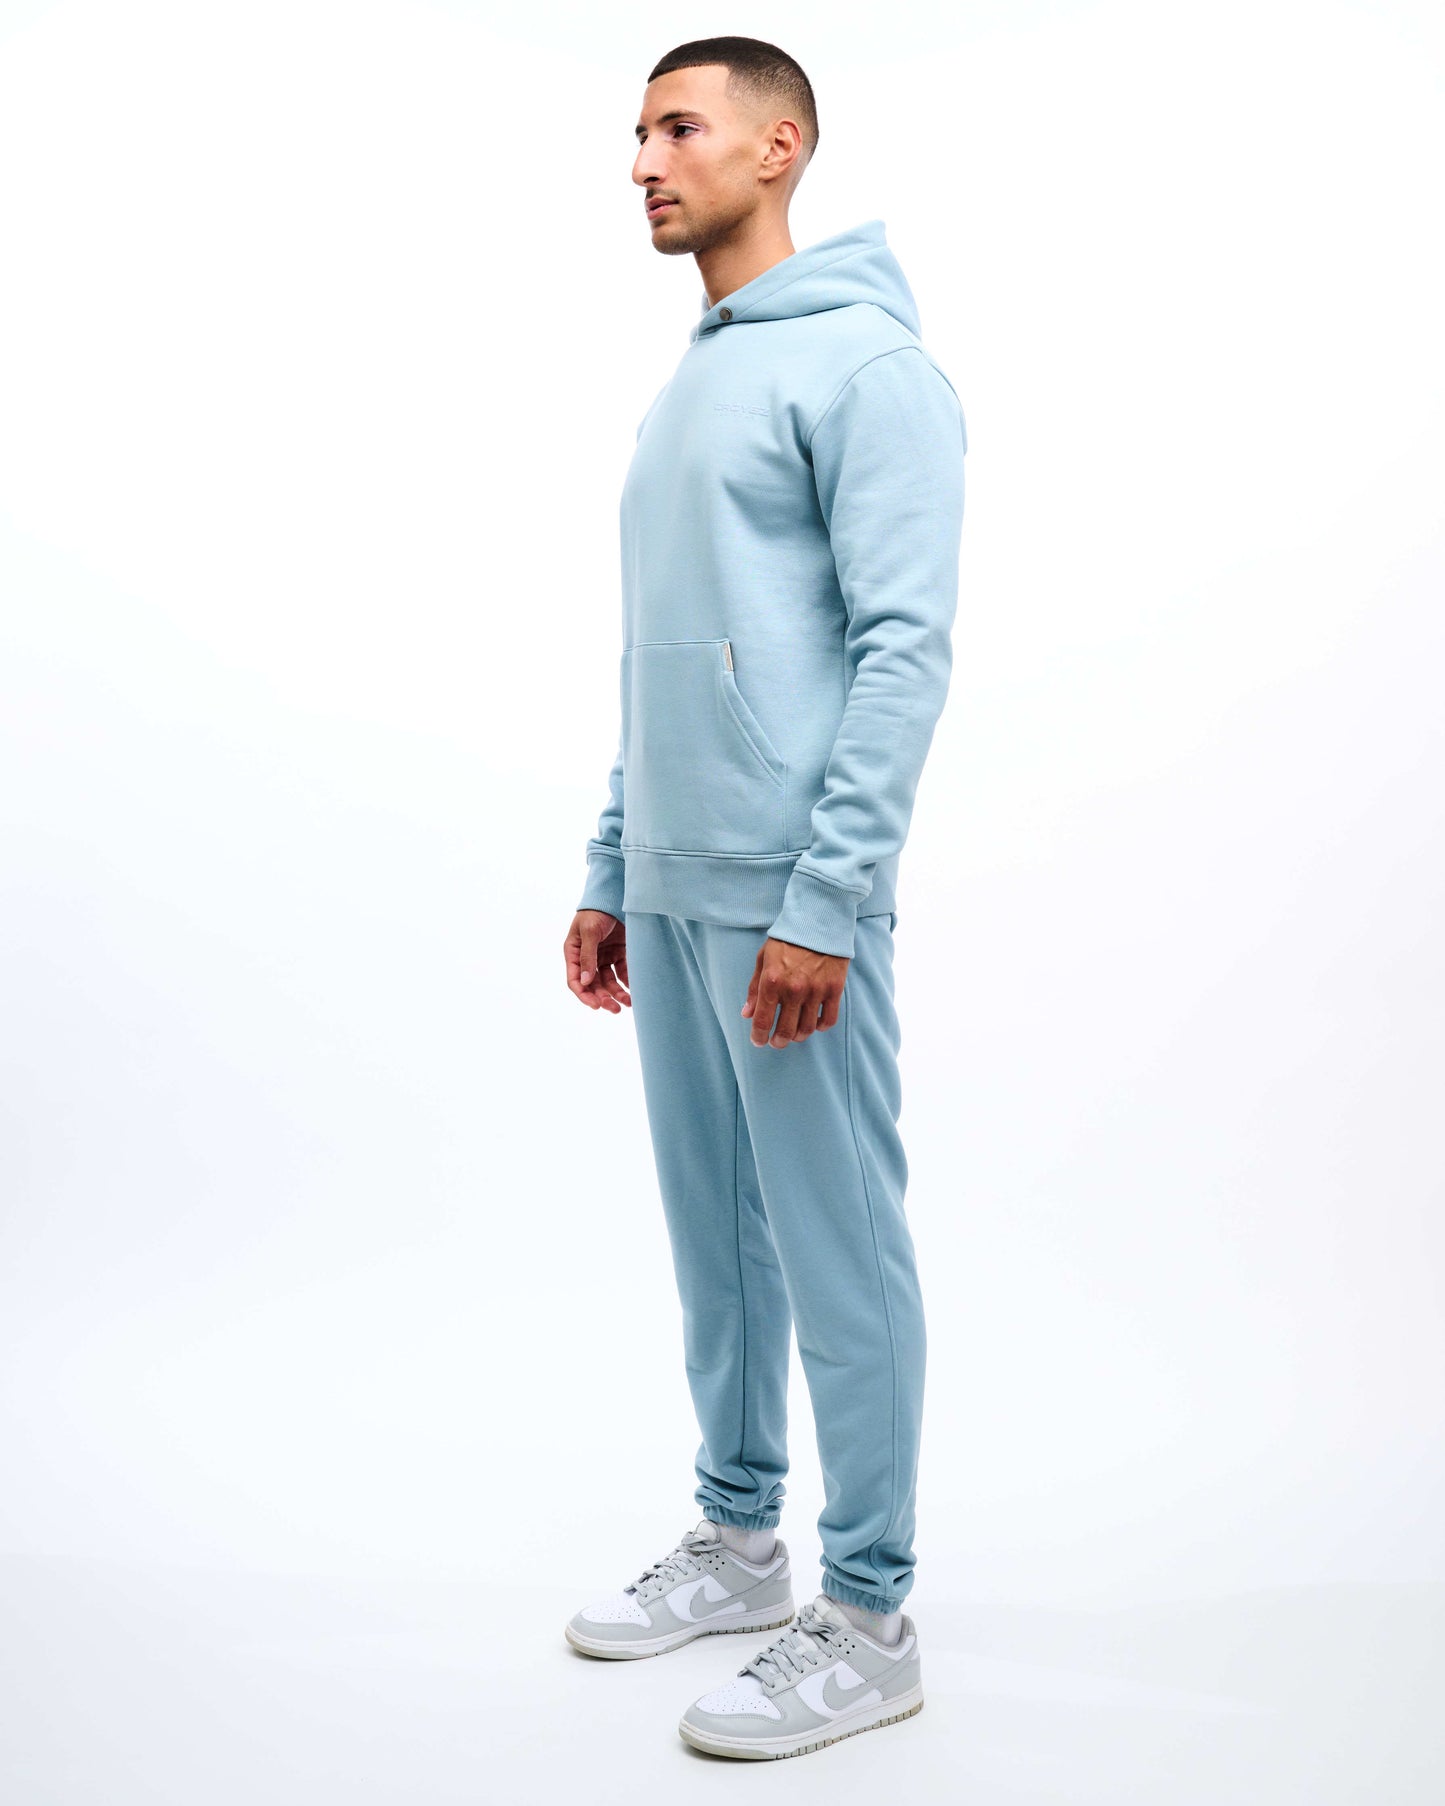 CROYEZ ORGANETTO TRACKPANTS - DUST BLUE